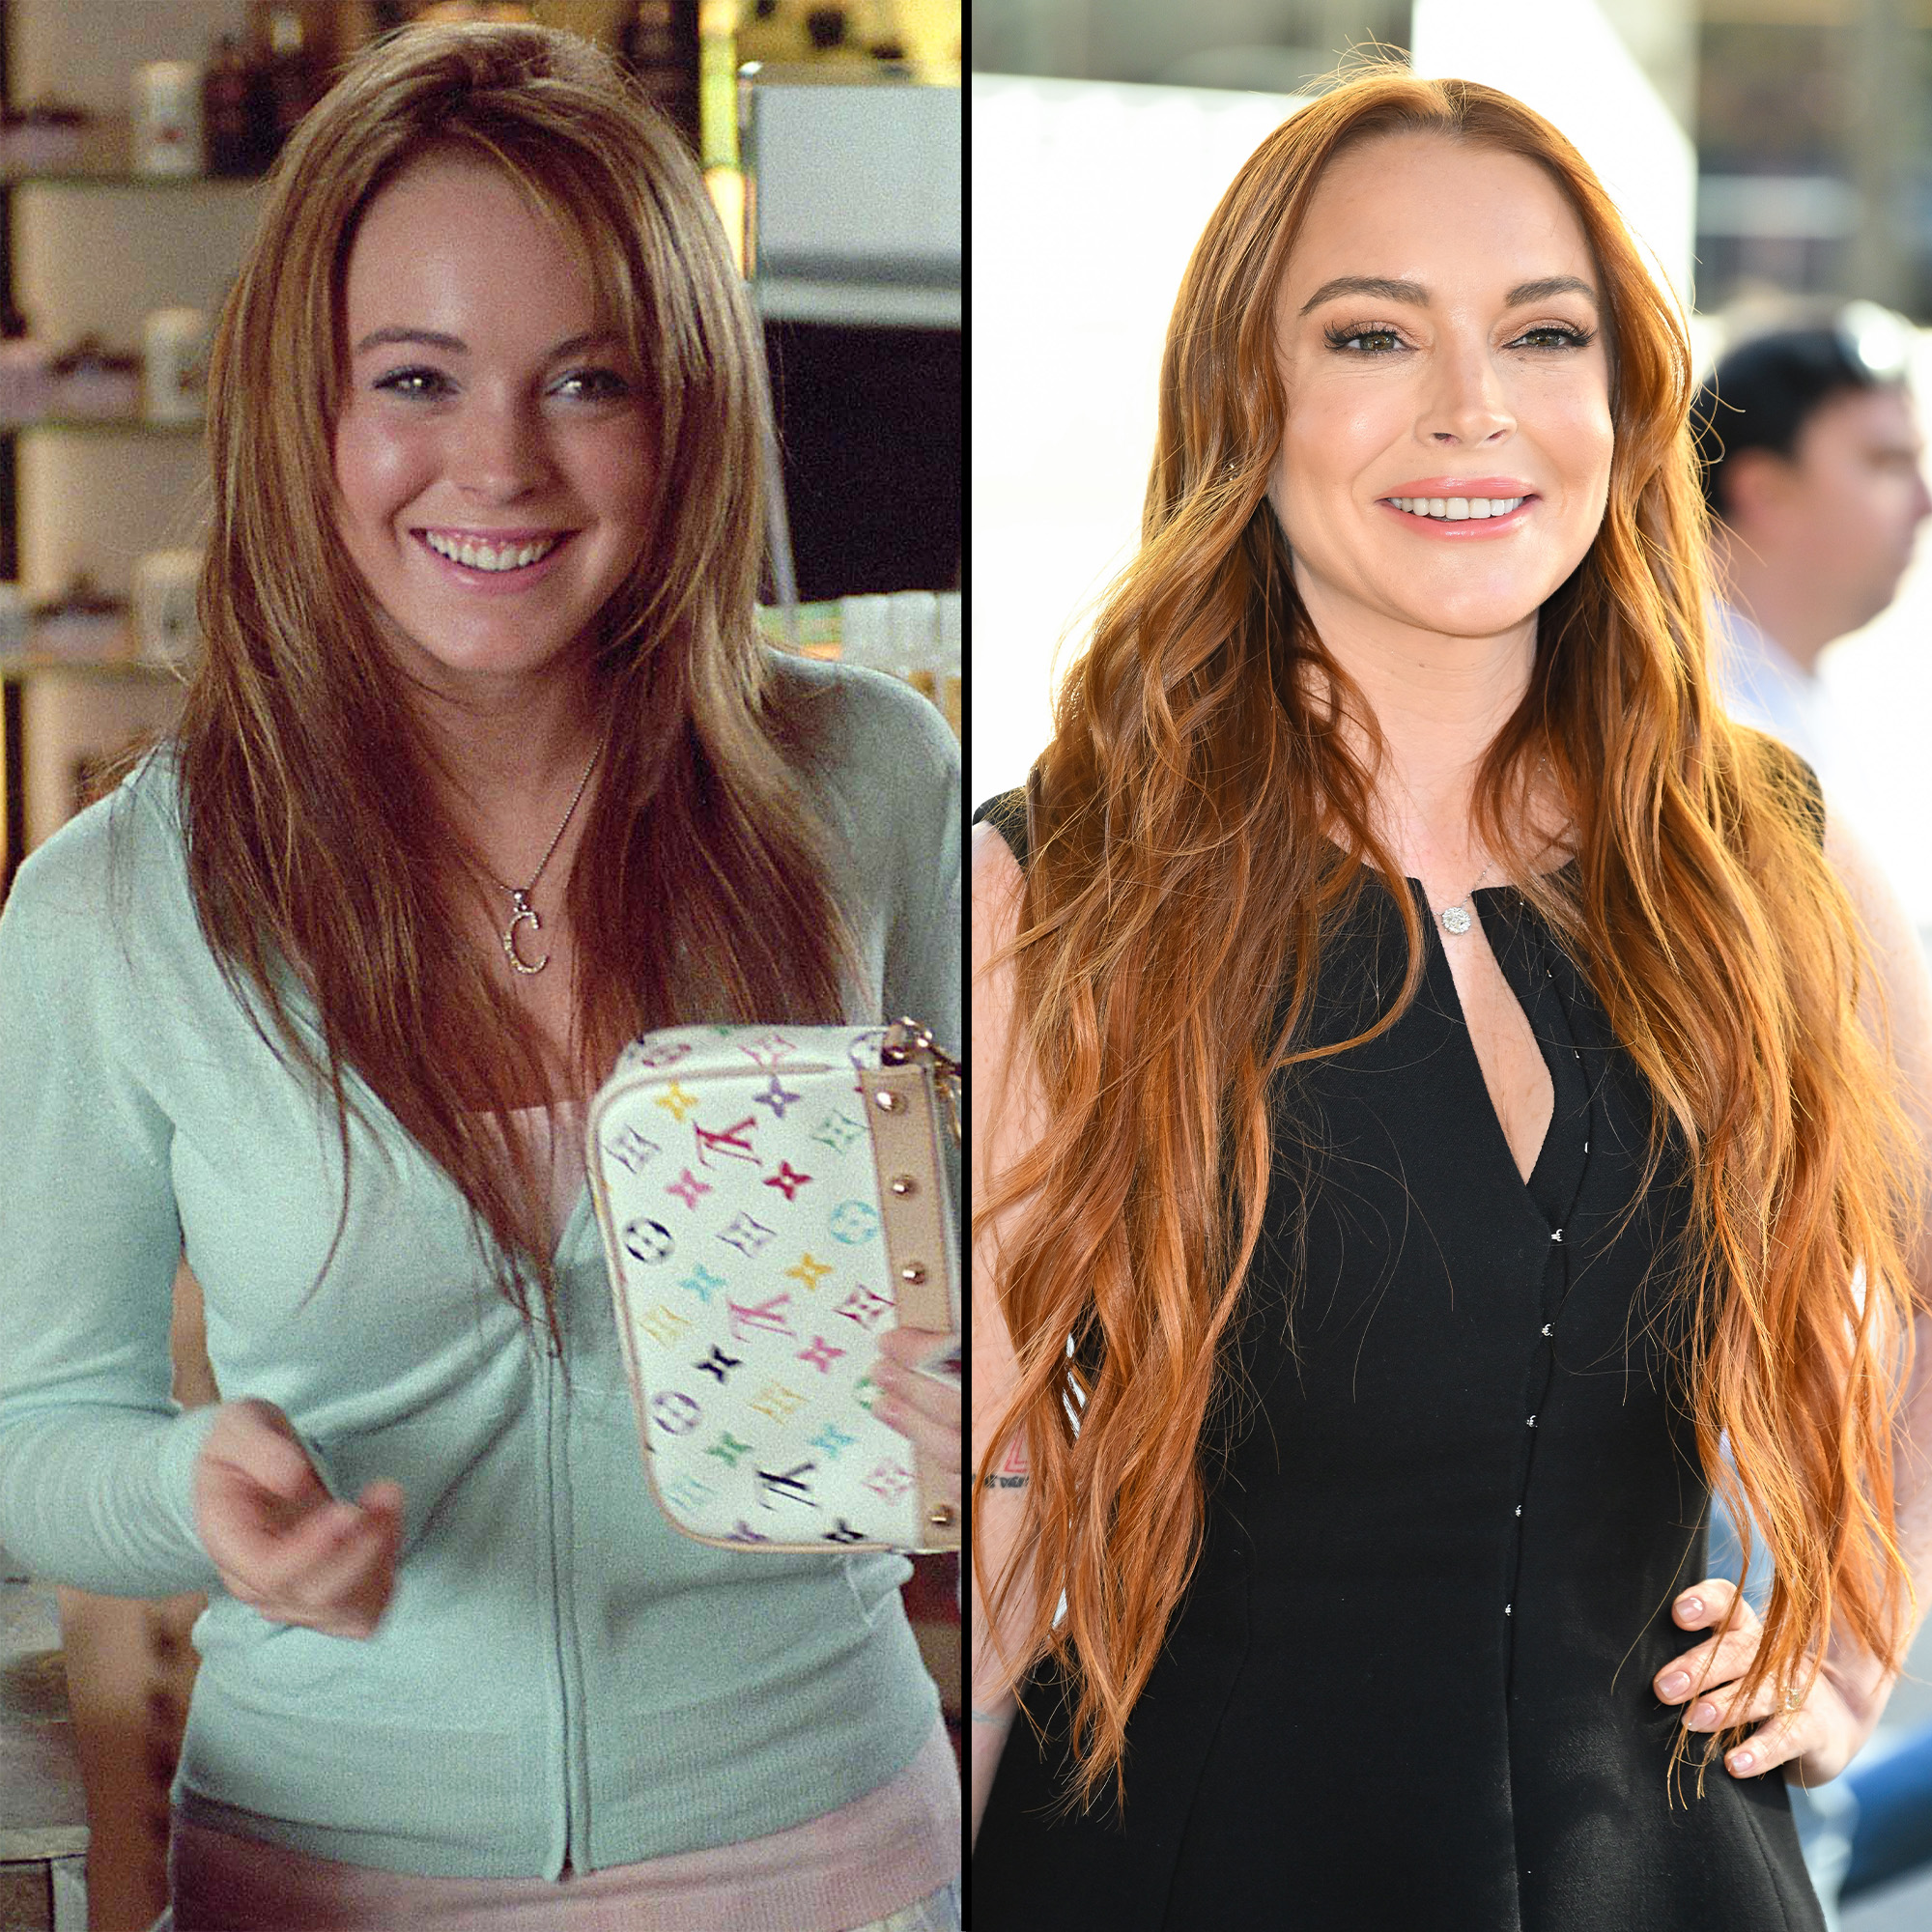 Mean Girls' Cast: Where Are They Now?